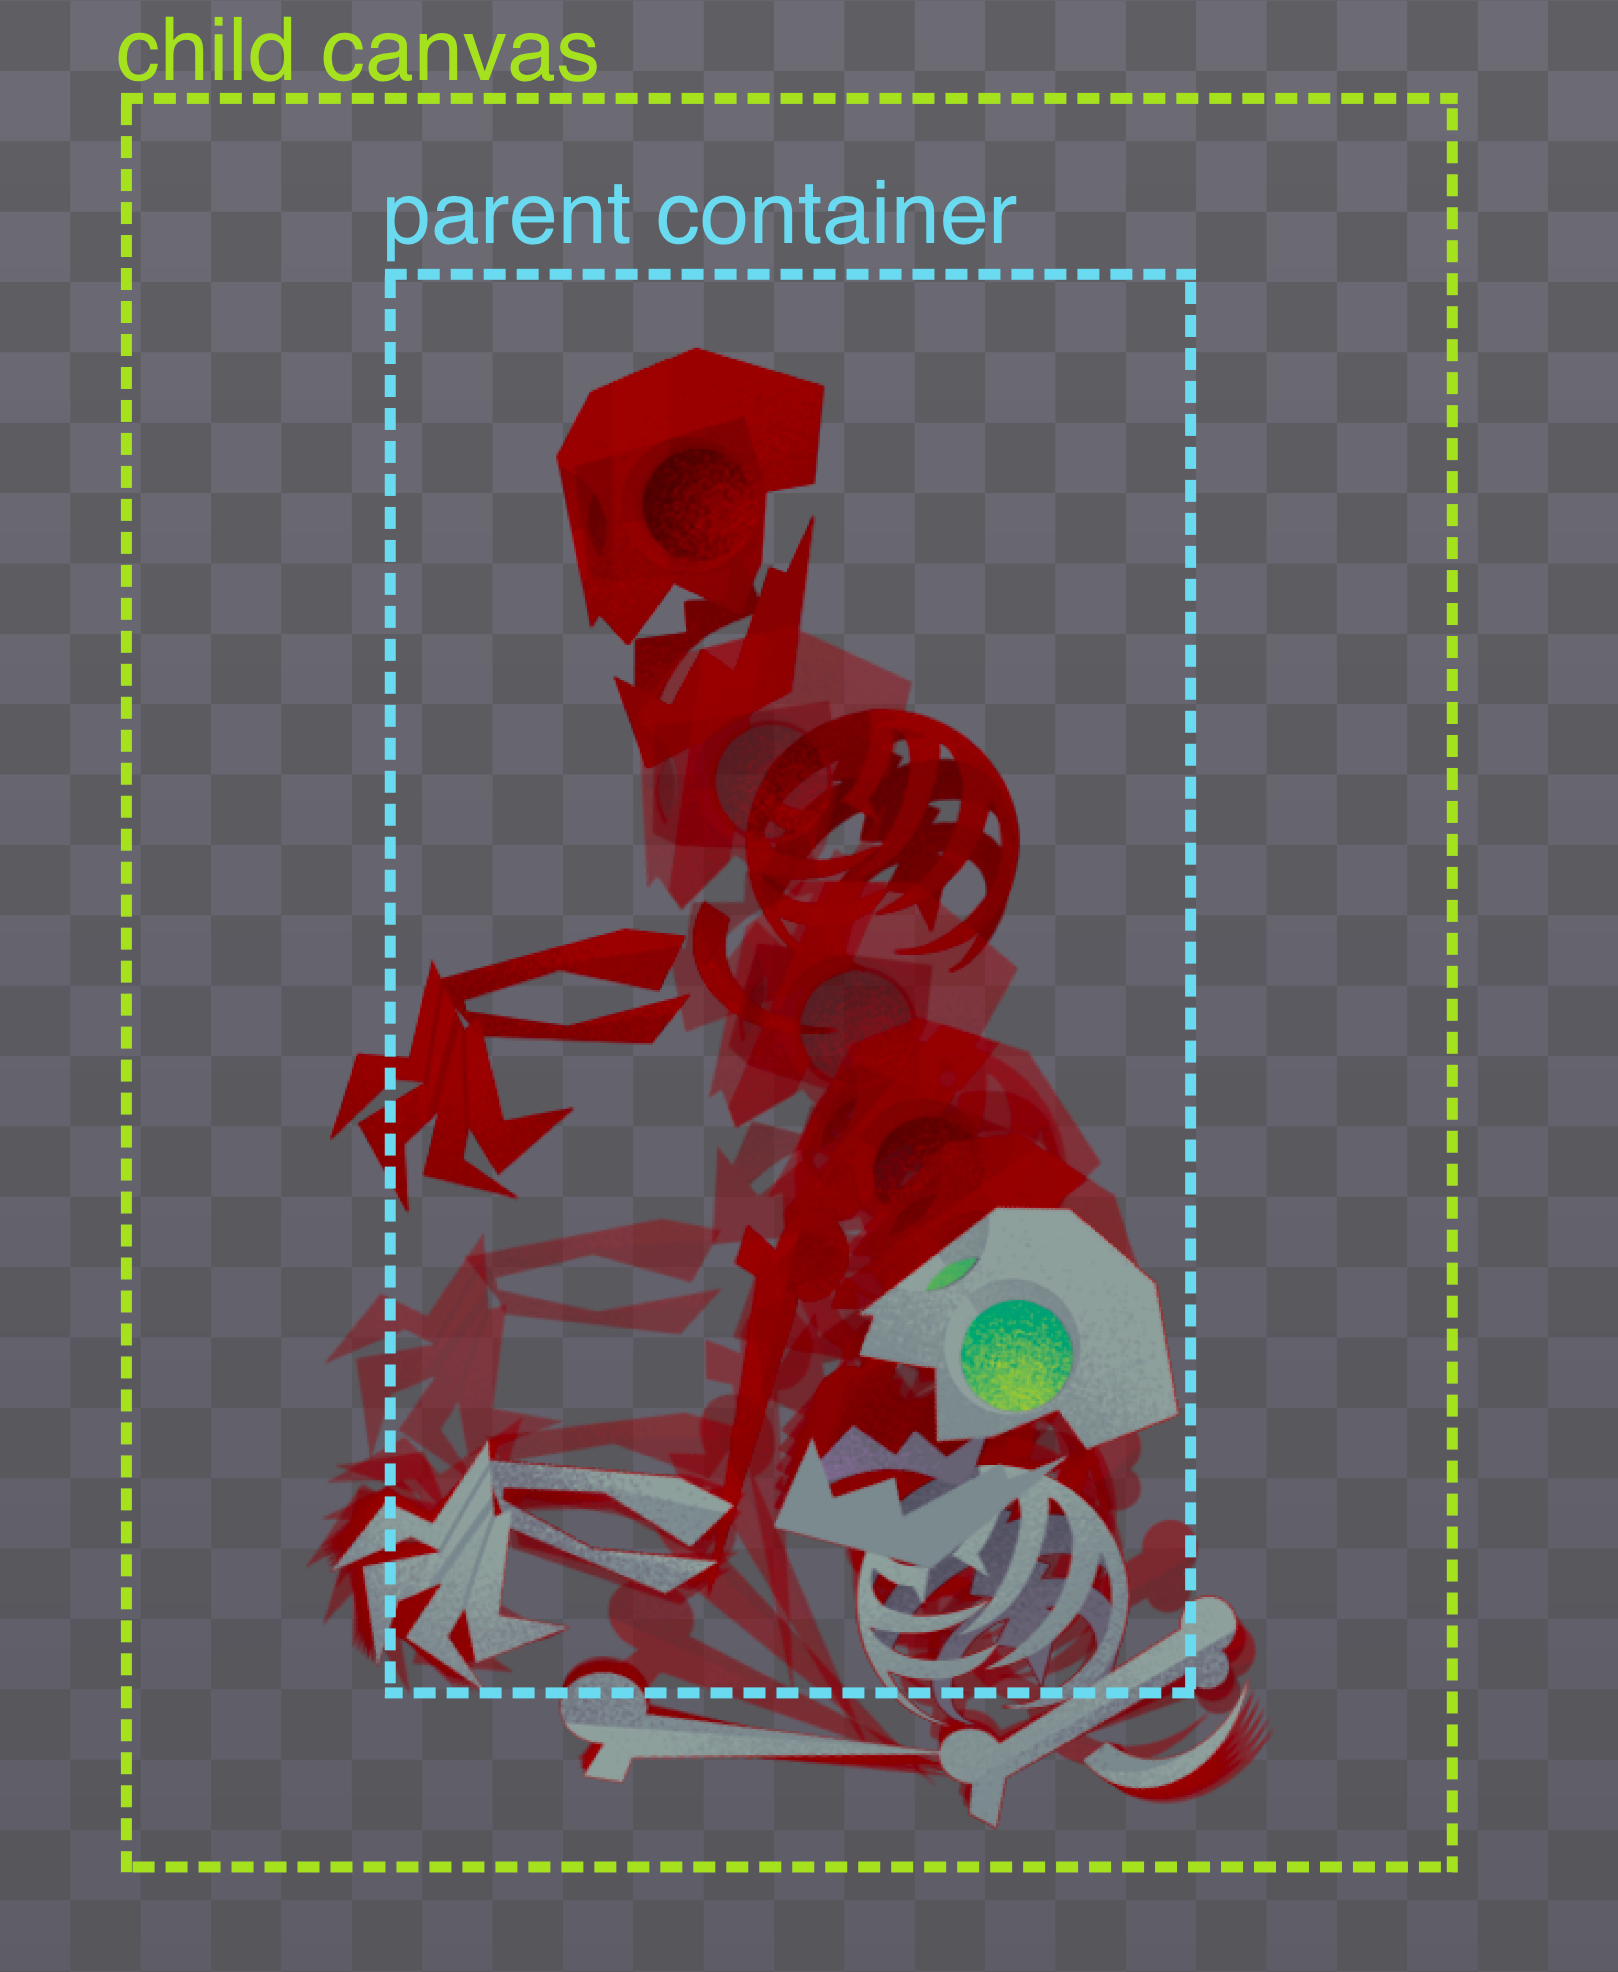 pinning element to parent's center